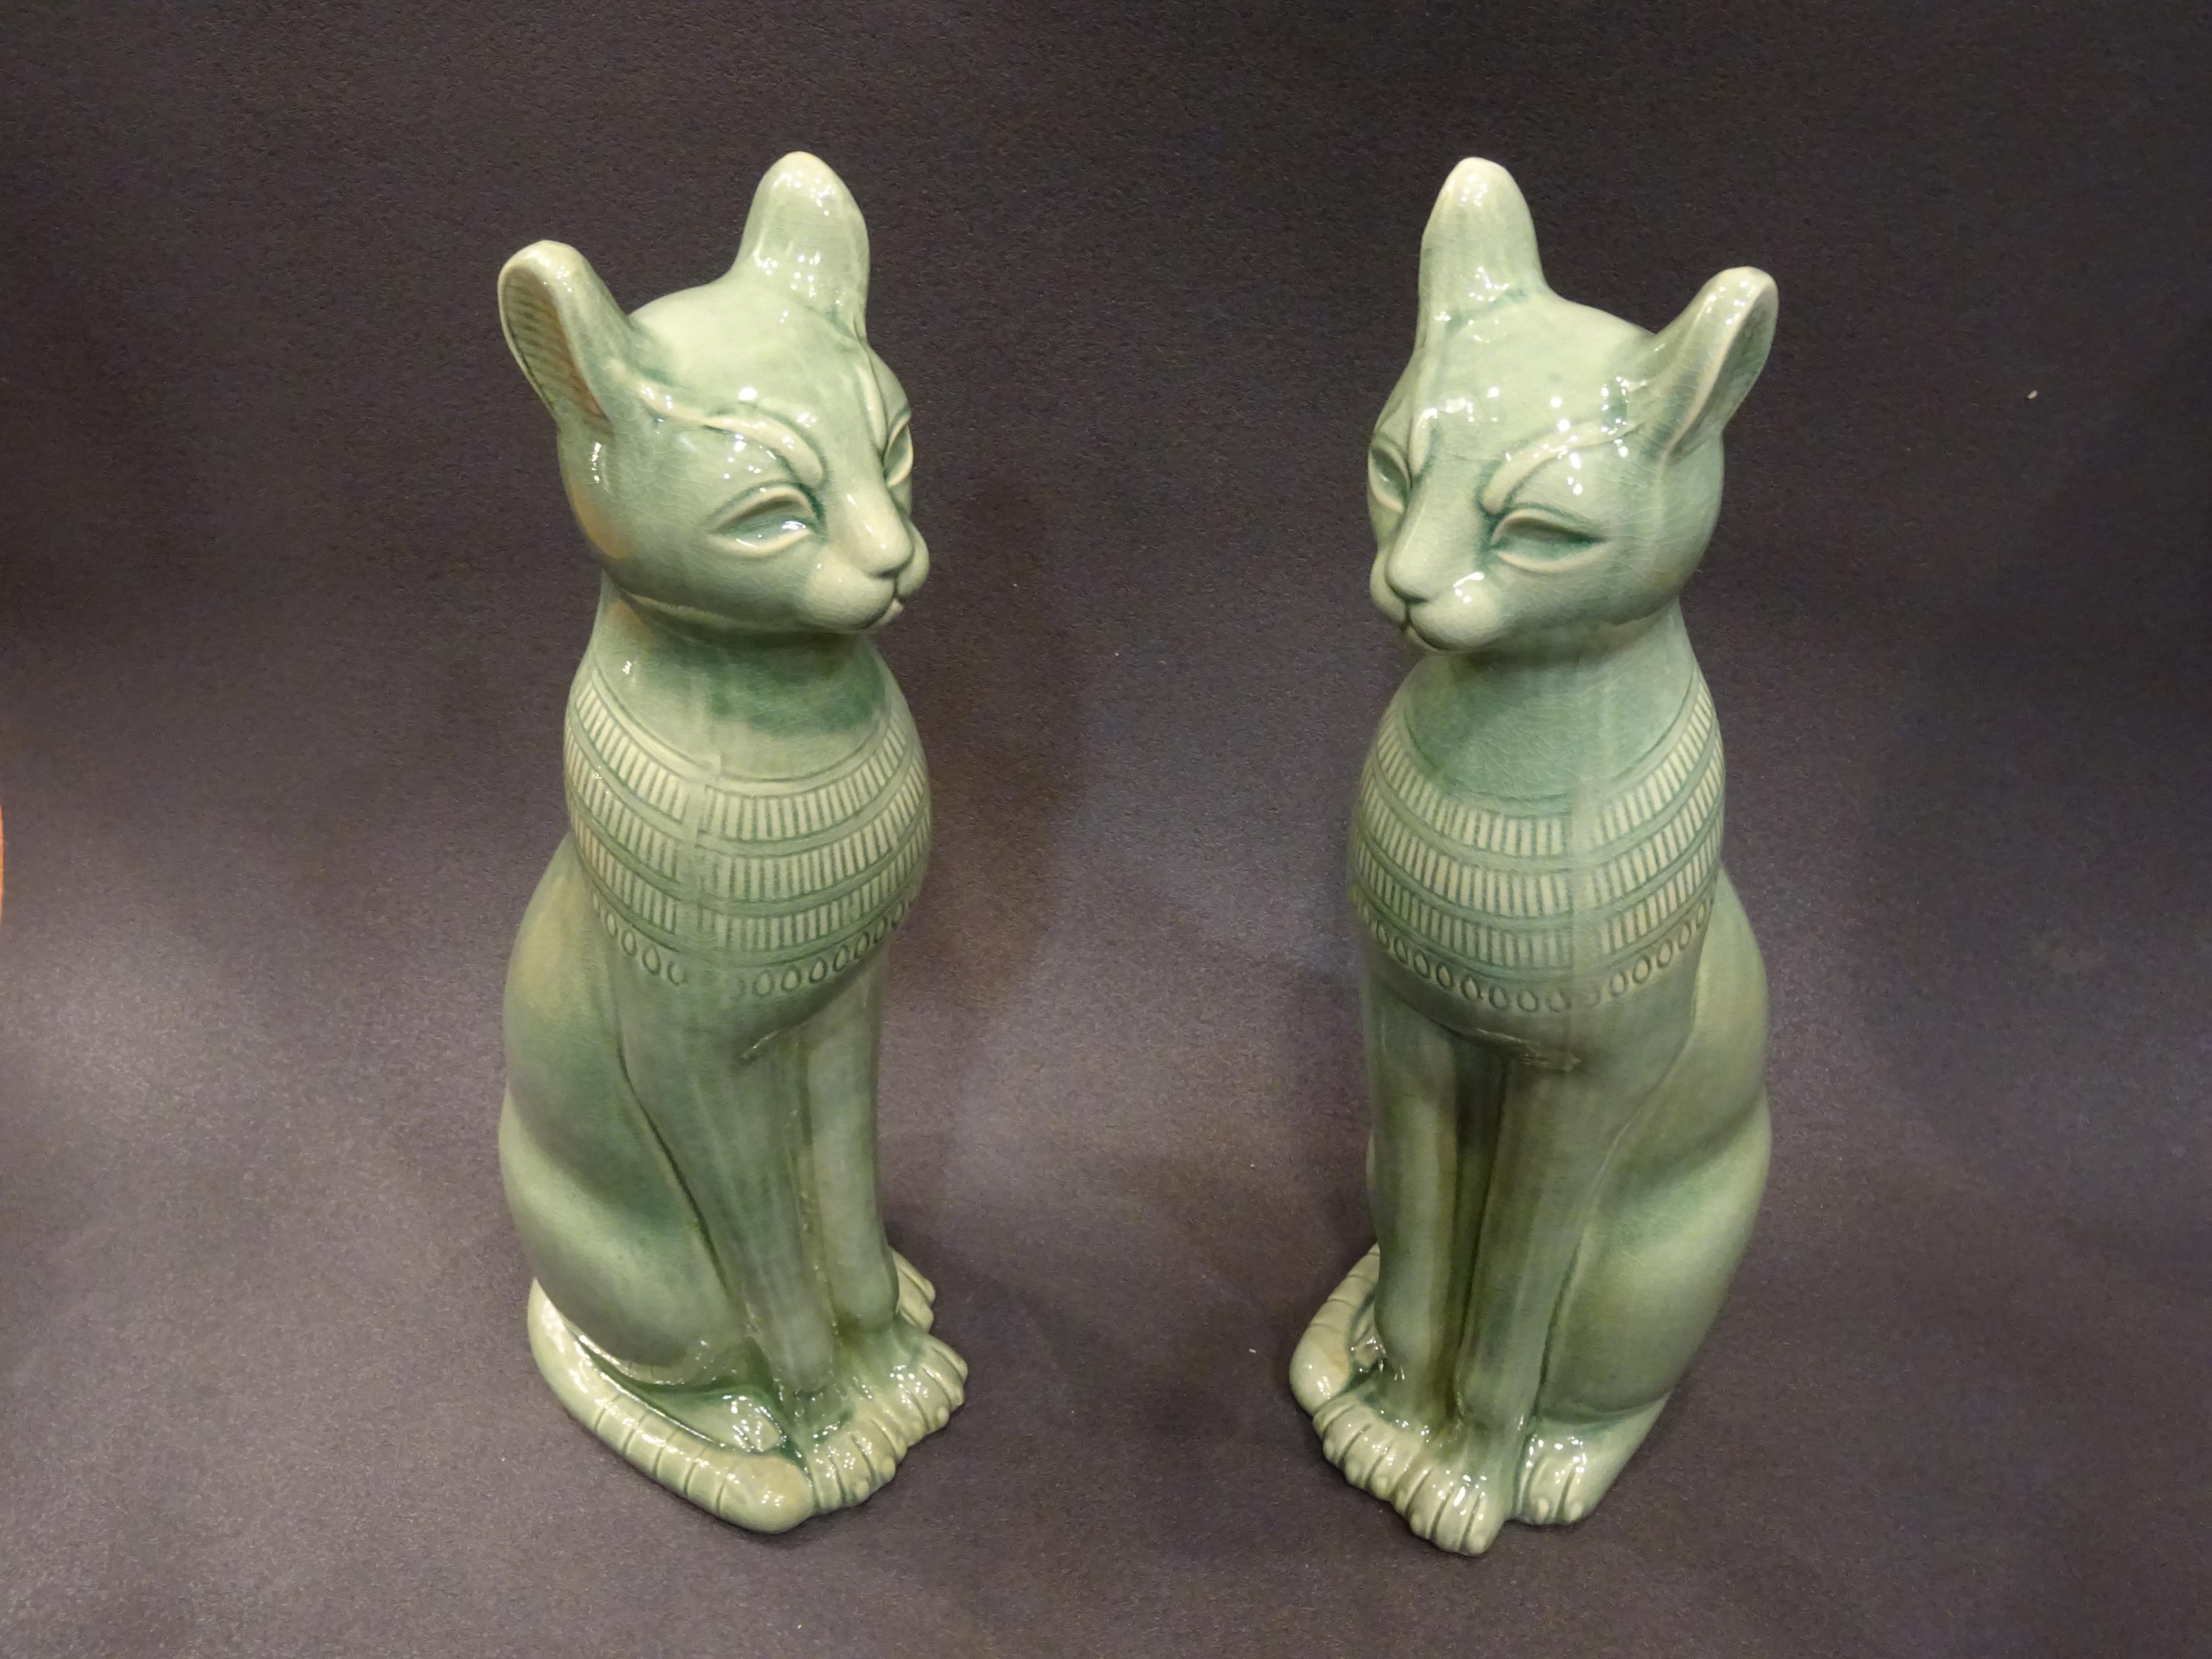 Italian 1960s Italy Couple of Cats Sculptures in Celadon Color Ceramic